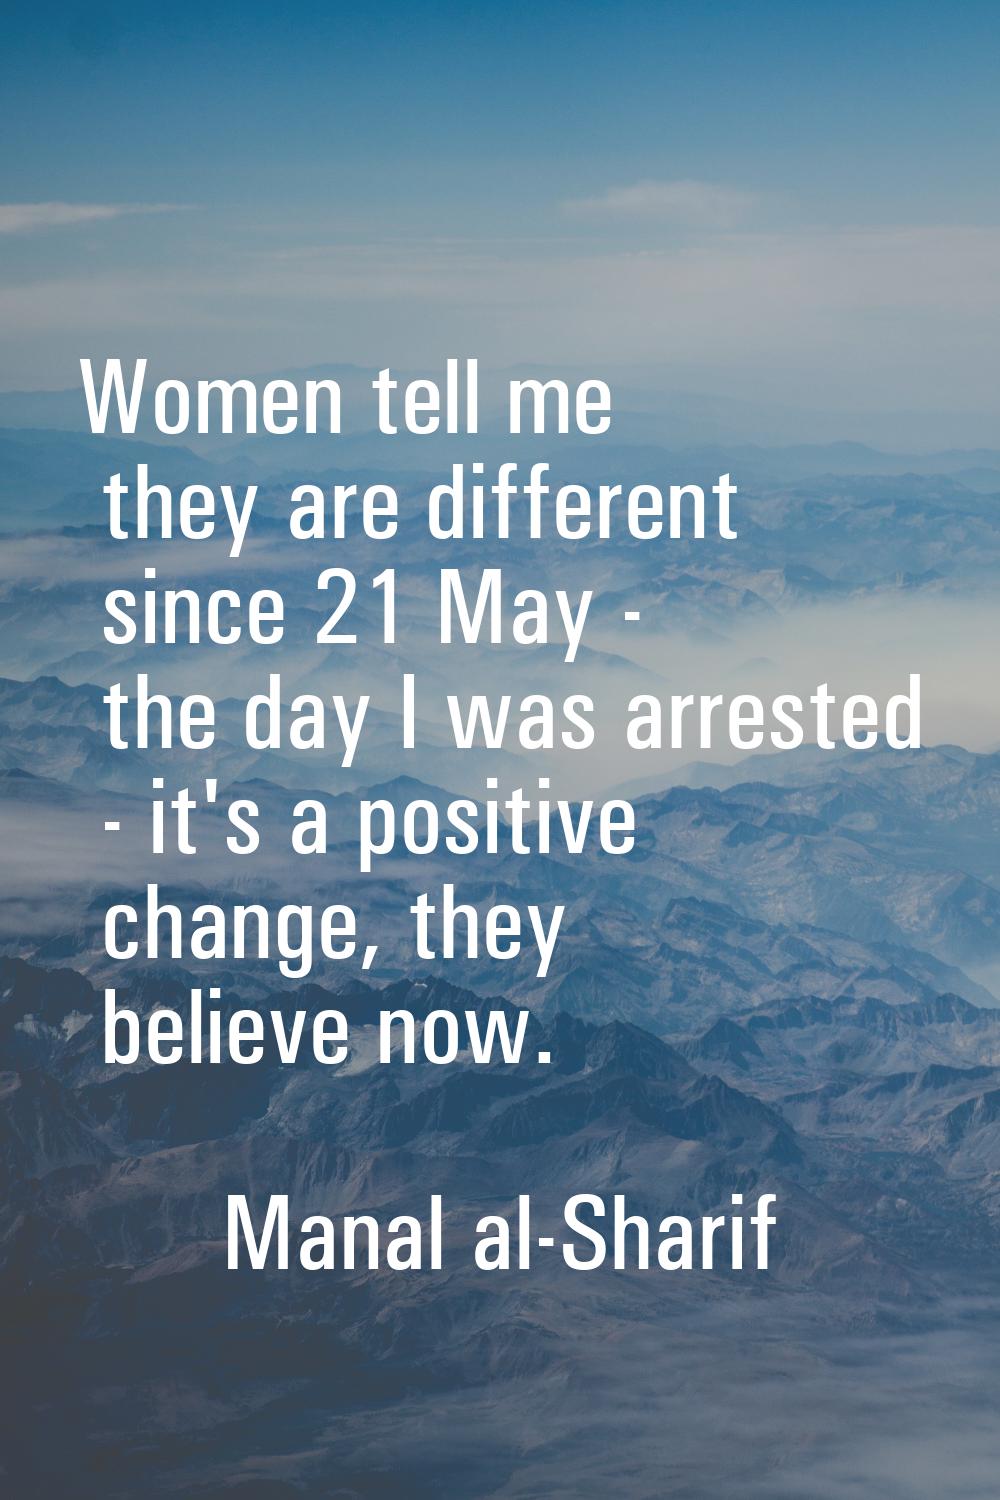 Women tell me they are different since 21 May - the day I was arrested - it's a positive change, th